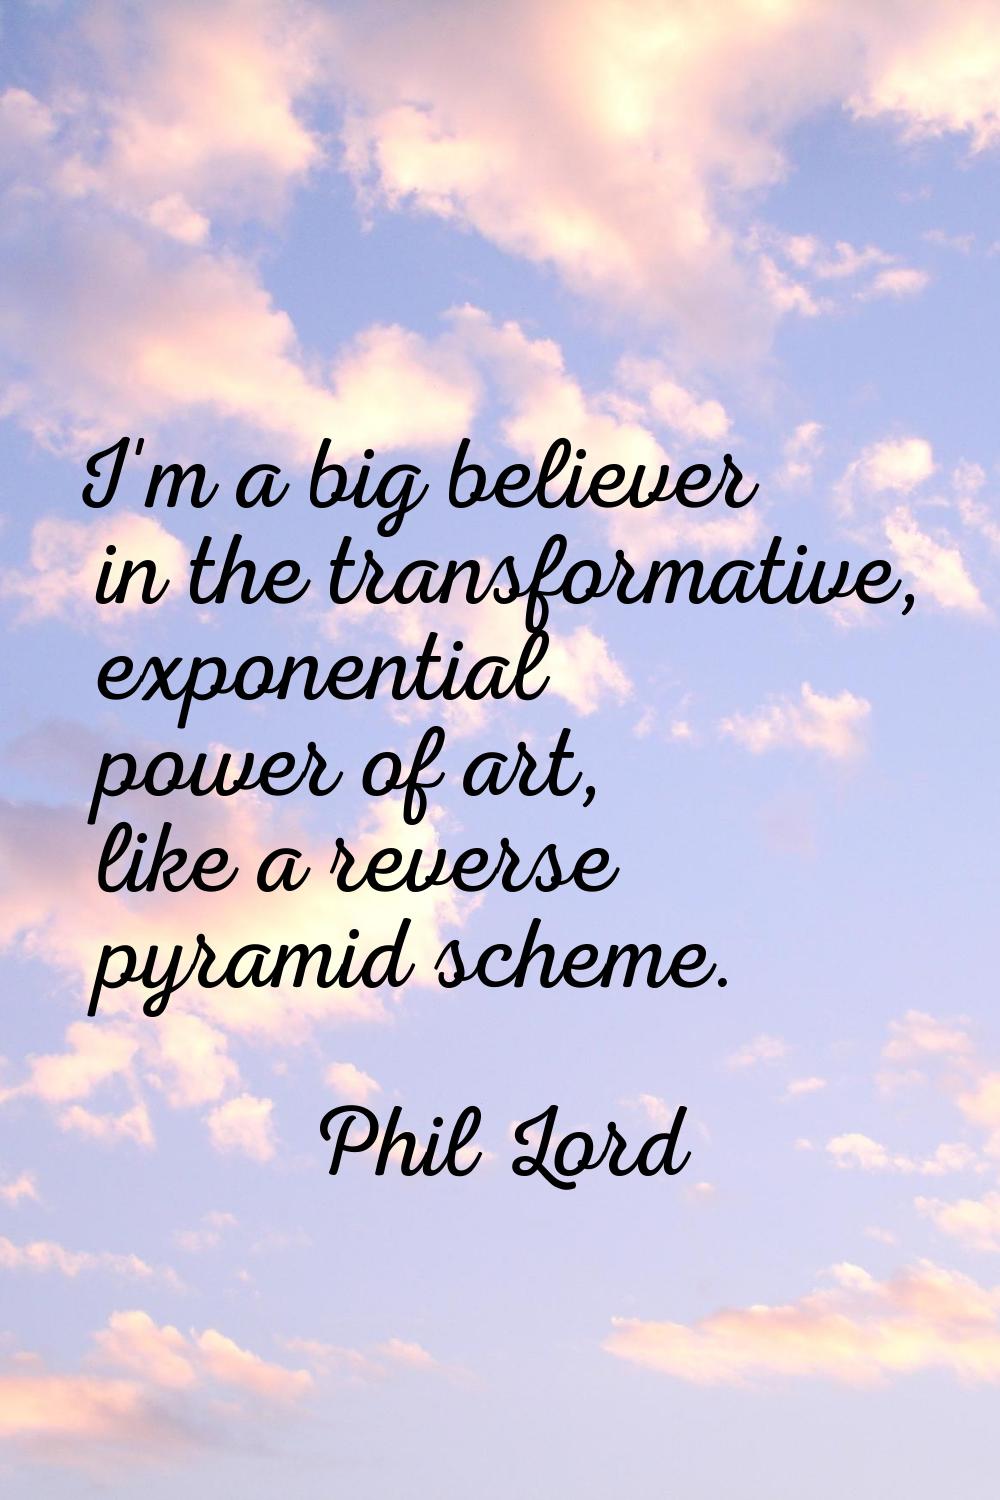 I'm a big believer in the transformative, exponential power of art, like a reverse pyramid scheme.